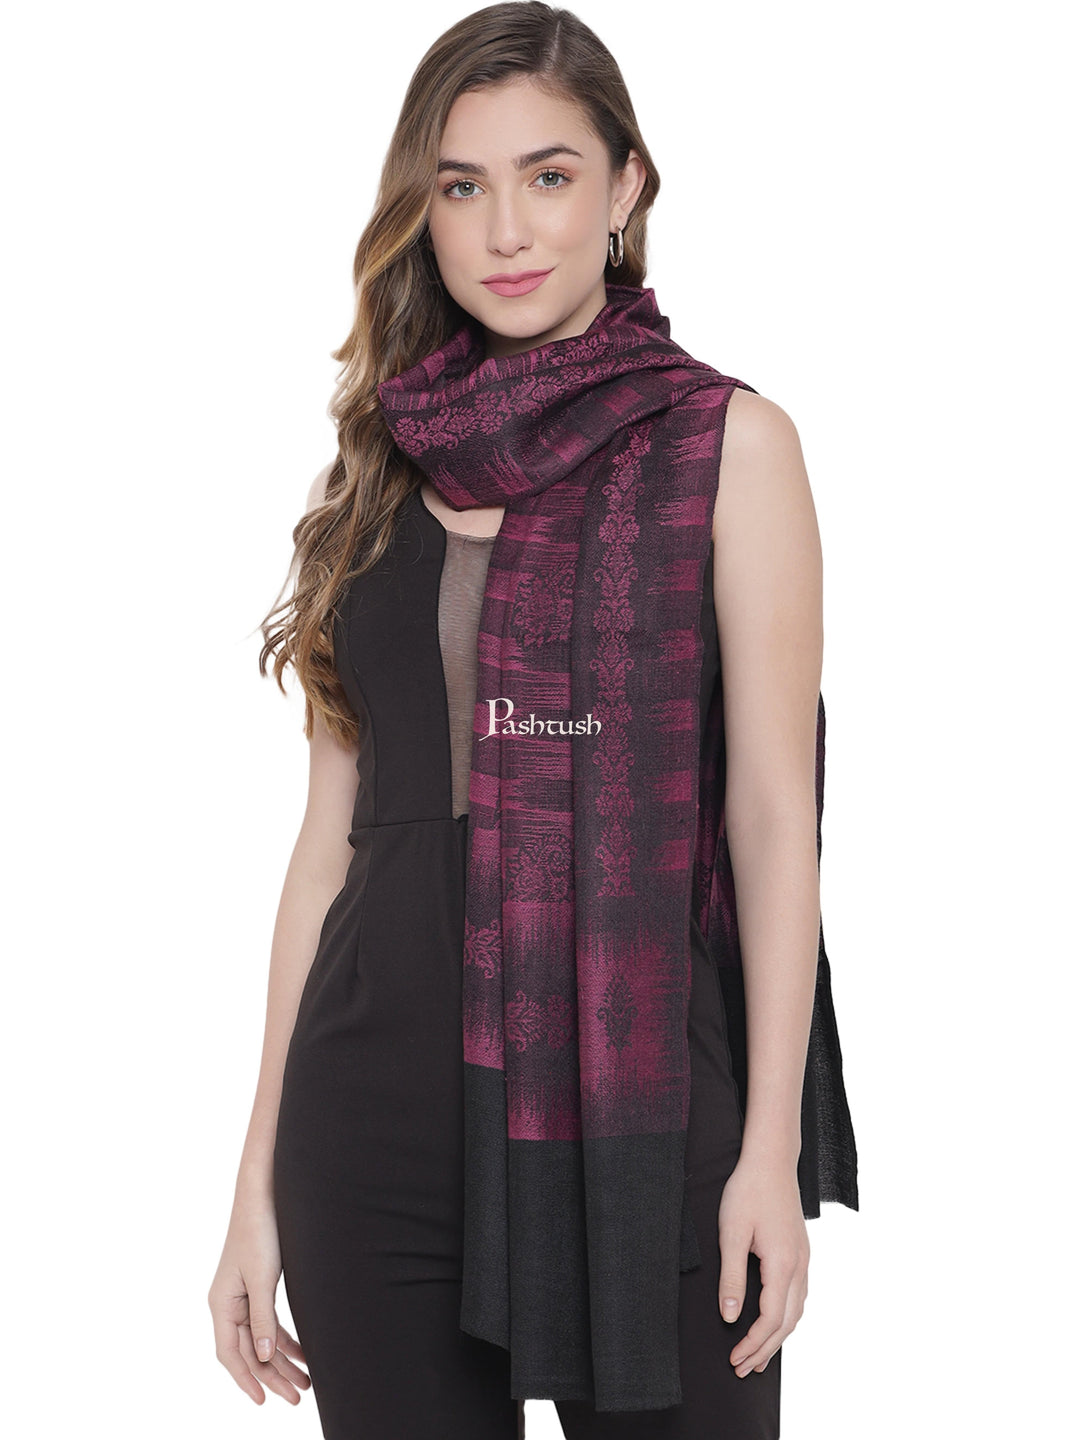 Pashtush India Womens Stoles and Scarves Scarf Pashtush Womens Fine Wool Stole, Striped Weave, Black and Violet